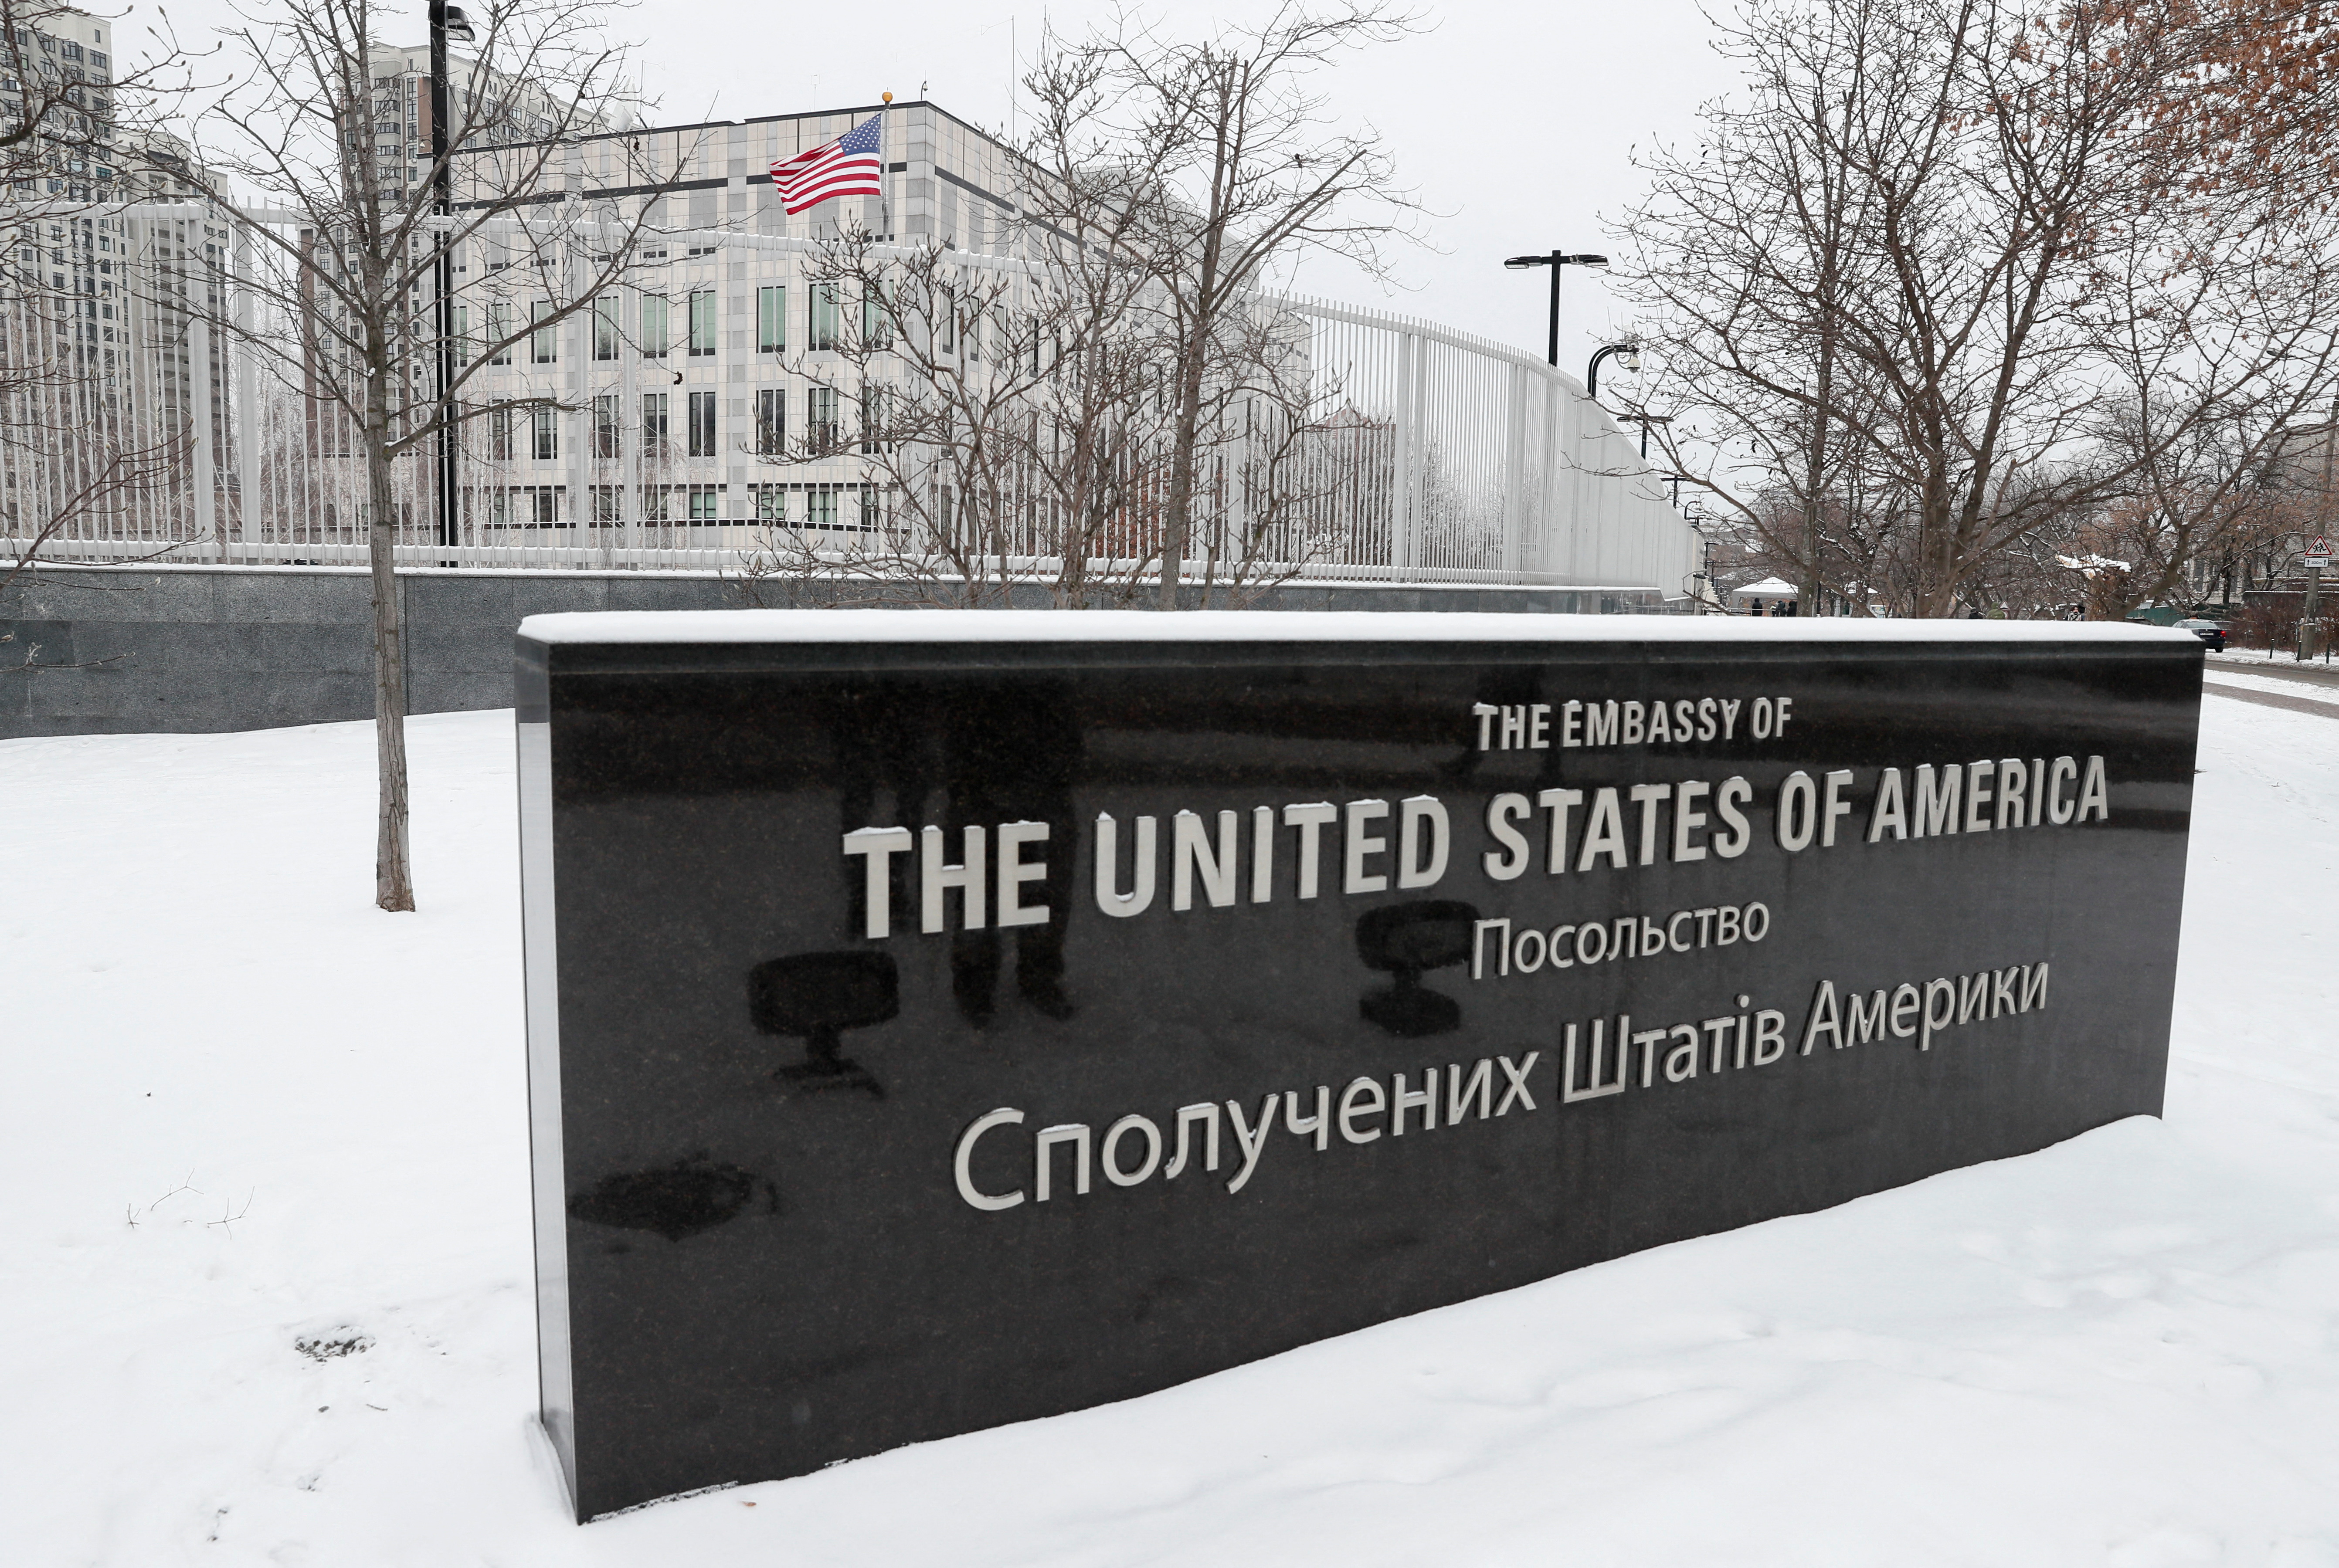 A view shows the U.S. embassy in Kyiv